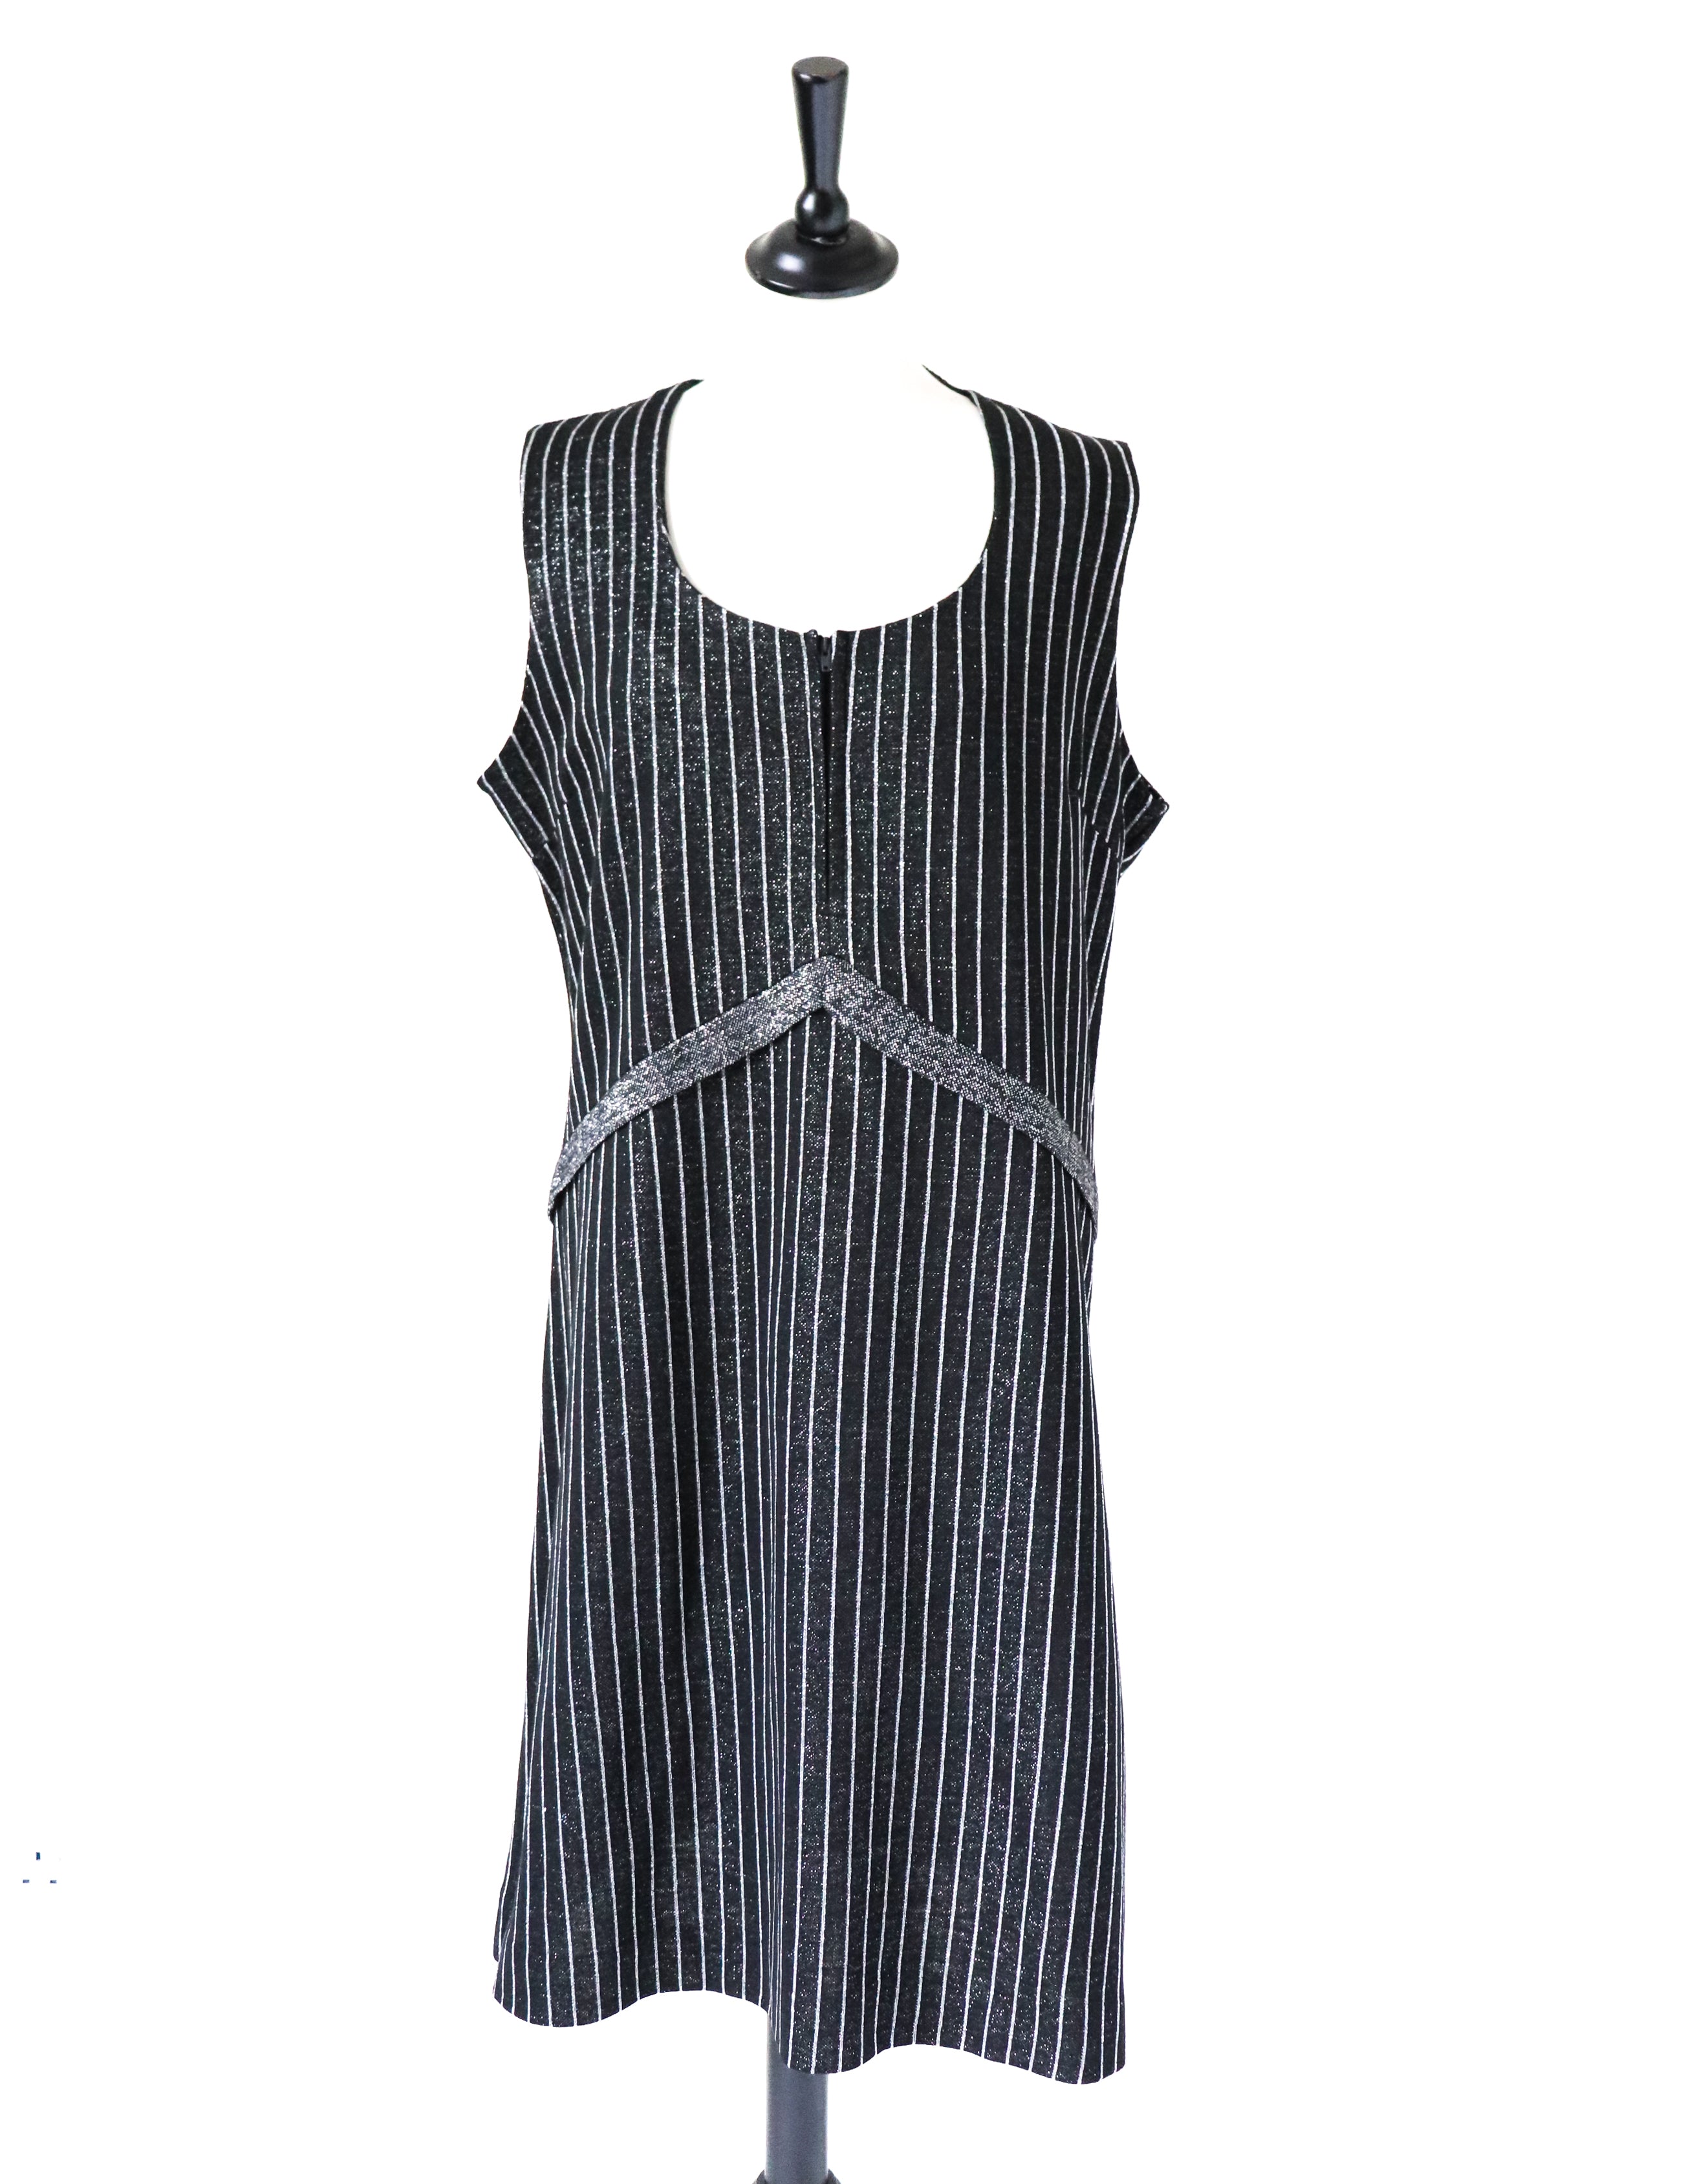 1960s Vintage Black Pinafore Dress - Mary Quant Style - Fit UK 14 / 16